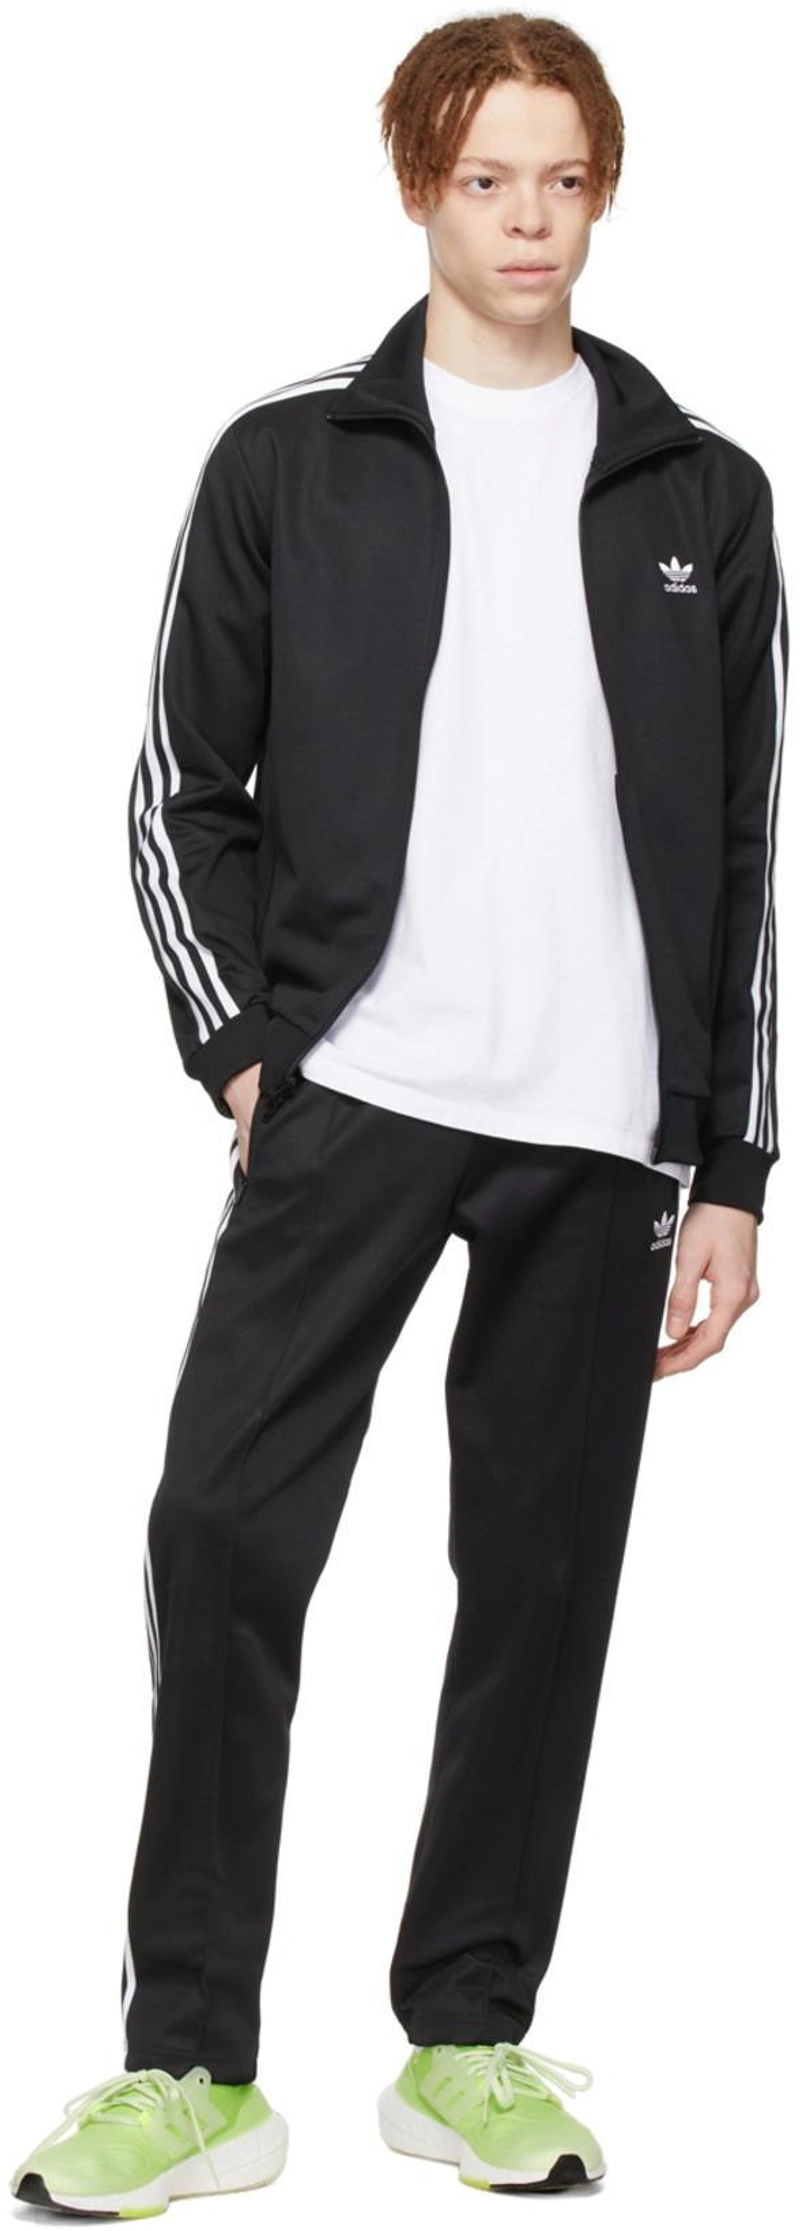 SSENSE's Post | 搭配: Frame Heavyweight Classic Fit Cotton T-shirt In White；Adidas Originals Black Adicolor Classics 3-stripes Track Pants；Adidas Originals Black Adicolor Classics Beckenbauer Primeblue Track Jacket